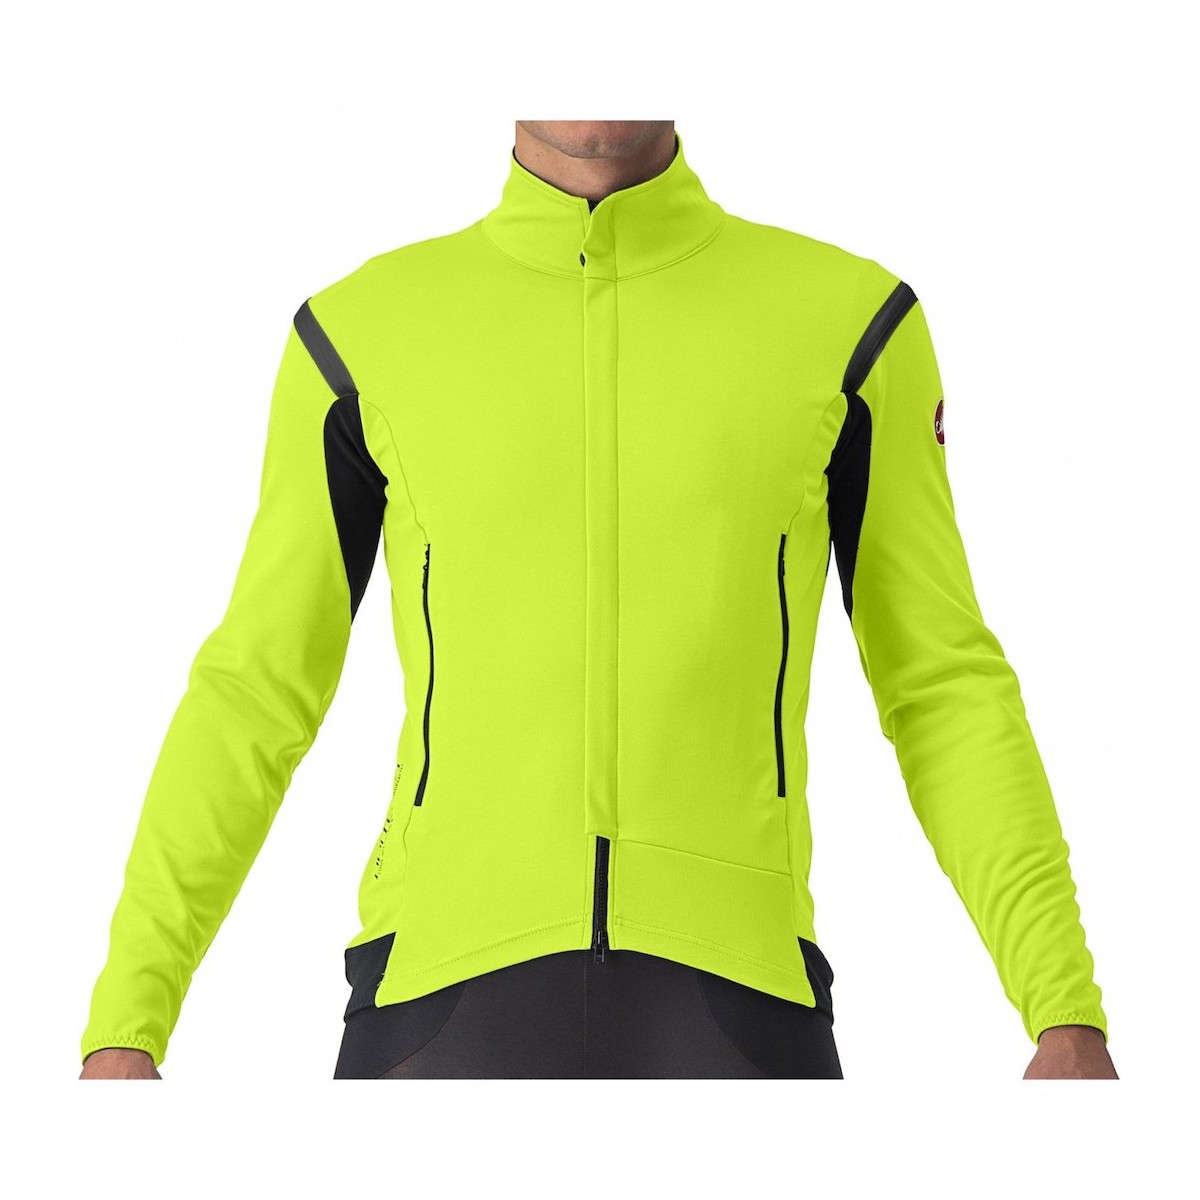 CASTELLI PERFETTO ROS 2 cycling jacket - fluo